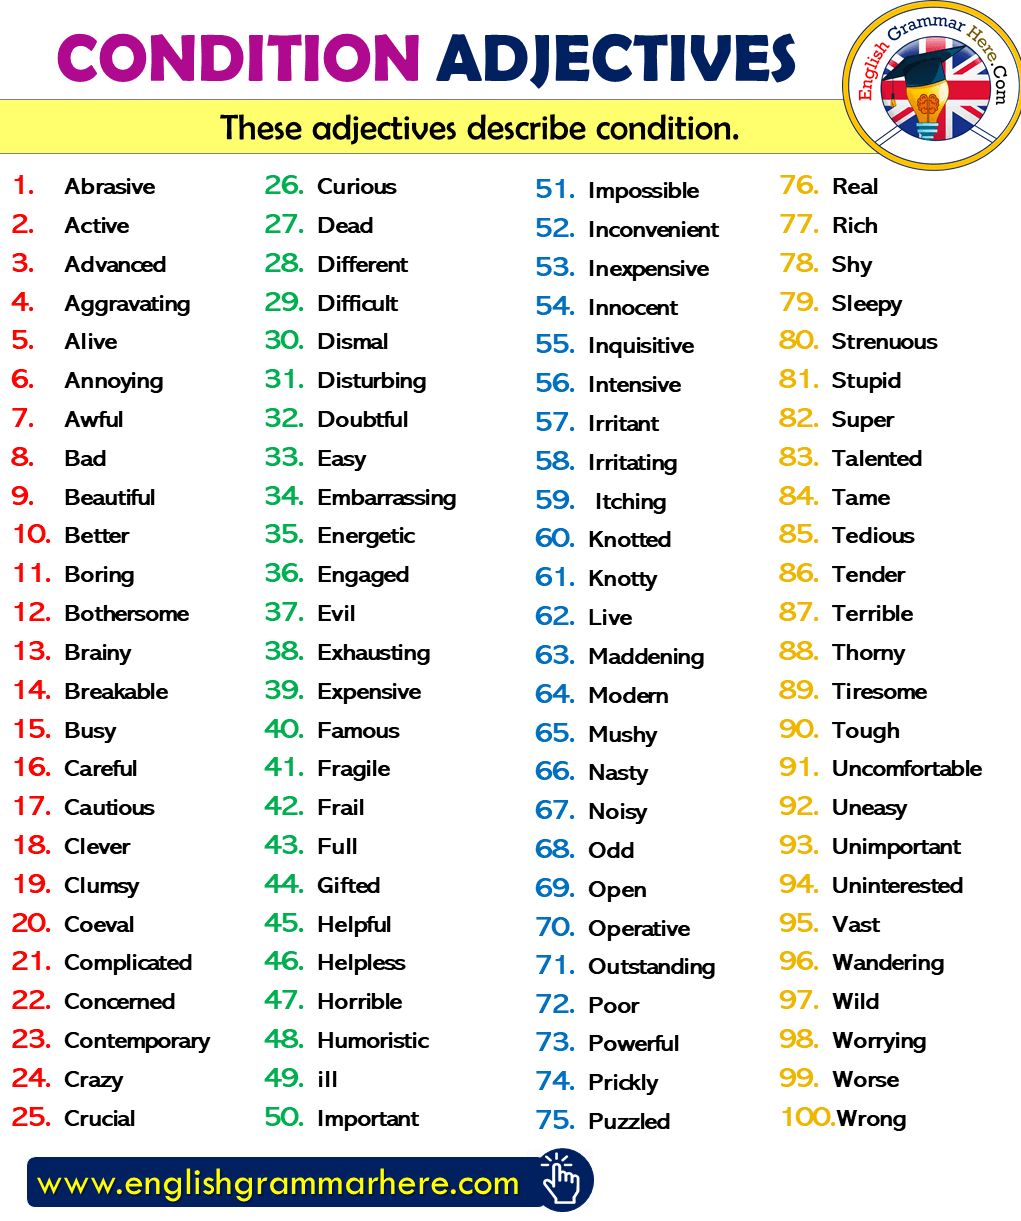 Condition Adjectives List in English   English Grammar Here